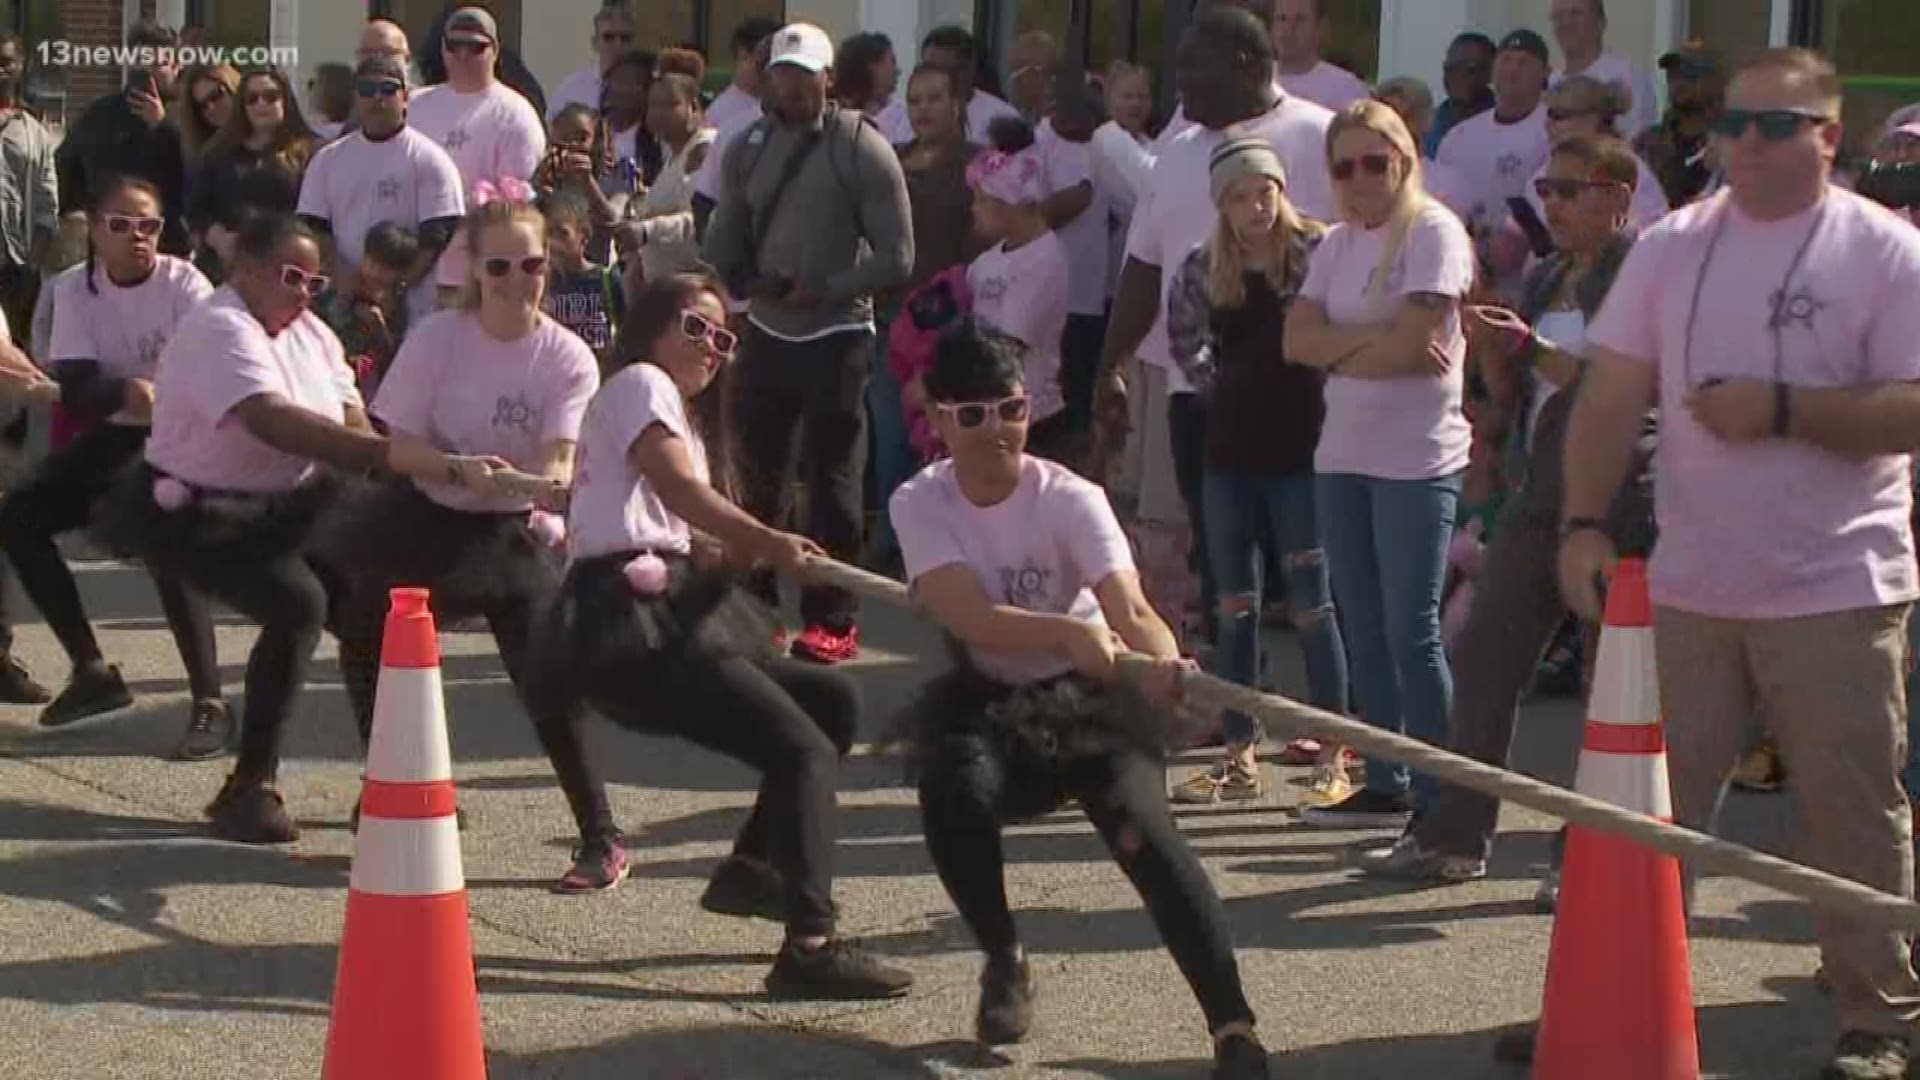 Teams of eight compete to see which team can pull a fire truck 12 feet in the fastest time. The event is in support of the fight against breast cancer.